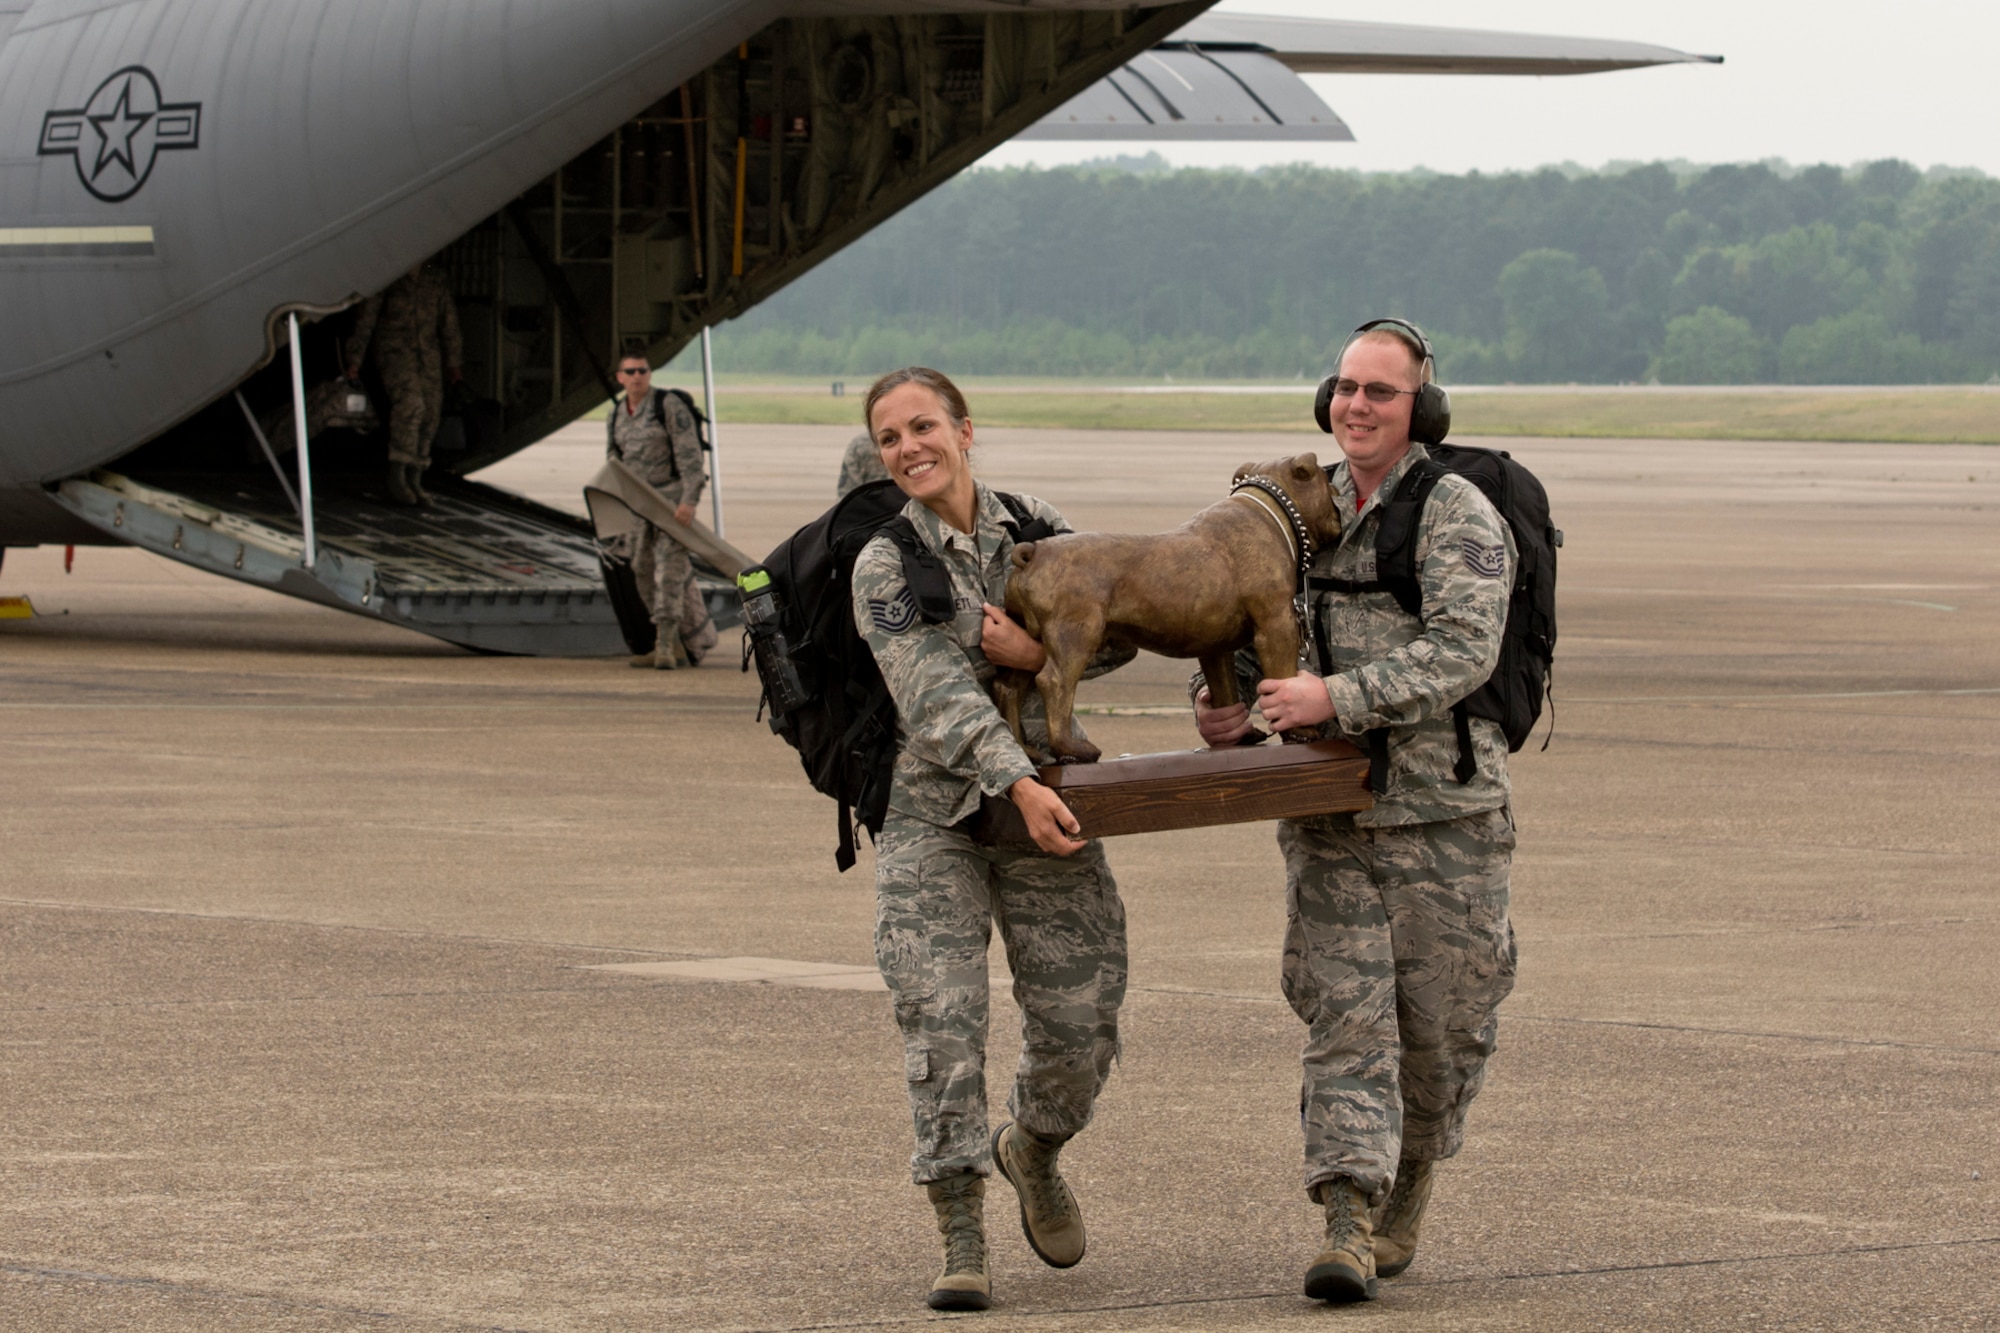 U.S. Air Force Reserve Tech Sgts. Kristen Garrett and Jason Gibson, air transportation specialists assigned to the 96th Aerial Port Squadron, carry the “Top-Dawg” trophy across the ramp upon their arrival April 28, 2017 at Little Rock Air Force Base, Ark. The 96th APS is the first repeat winner since the competition began in 2010. (U.S. Air Force photo by Master Sgt. Jeff Walston/Released)